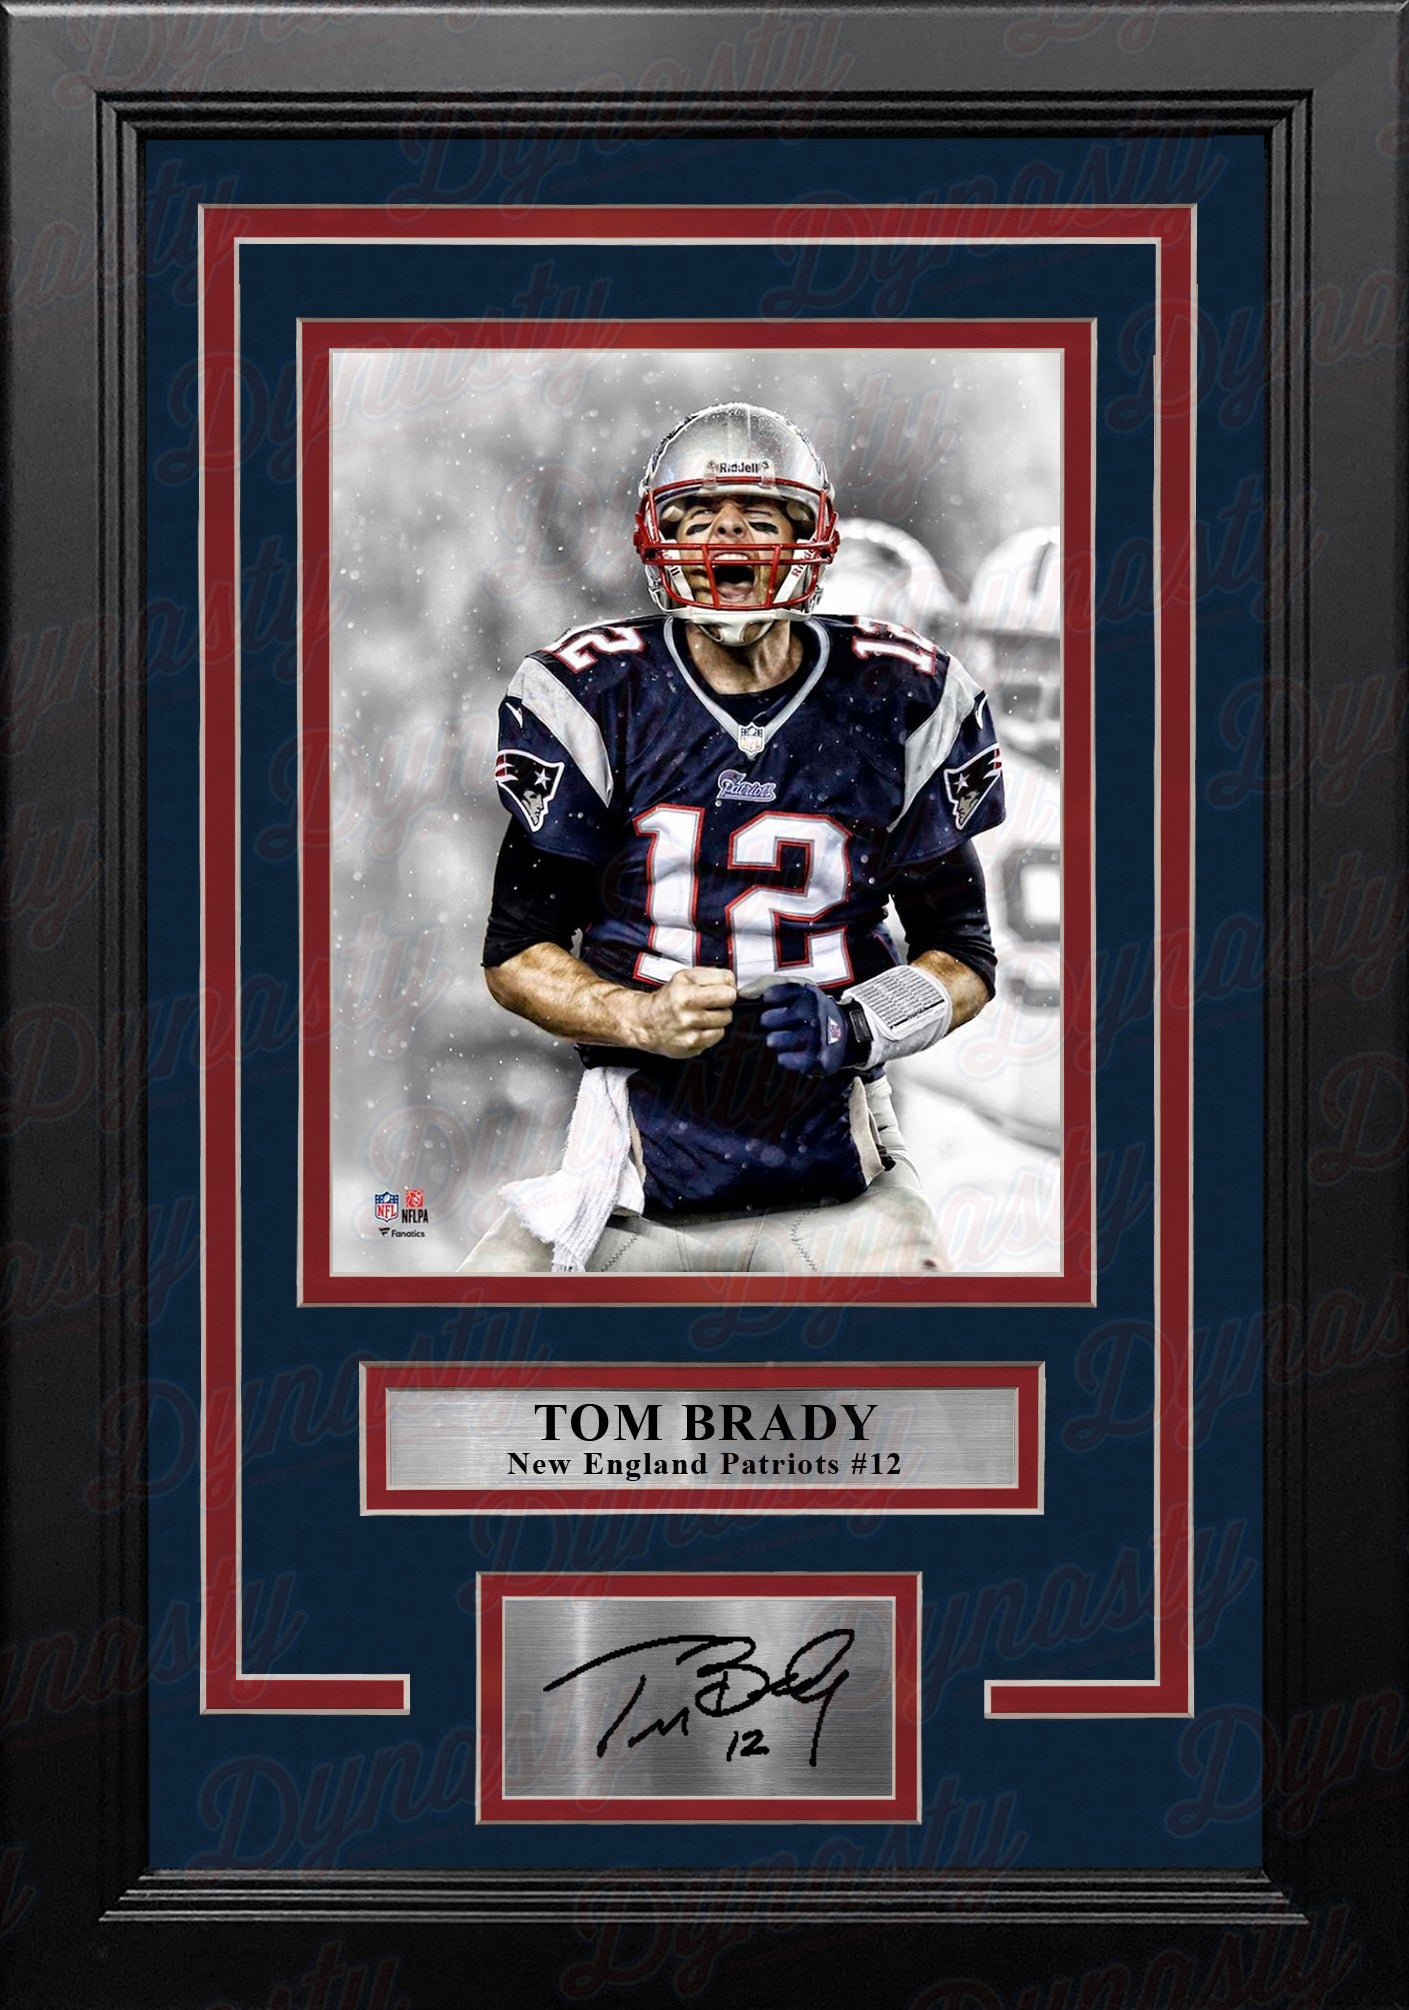 Tom Brady New England Patriots Framed Autographed 36 x 36 Tegata  Photograph - Limited Edition of 25 